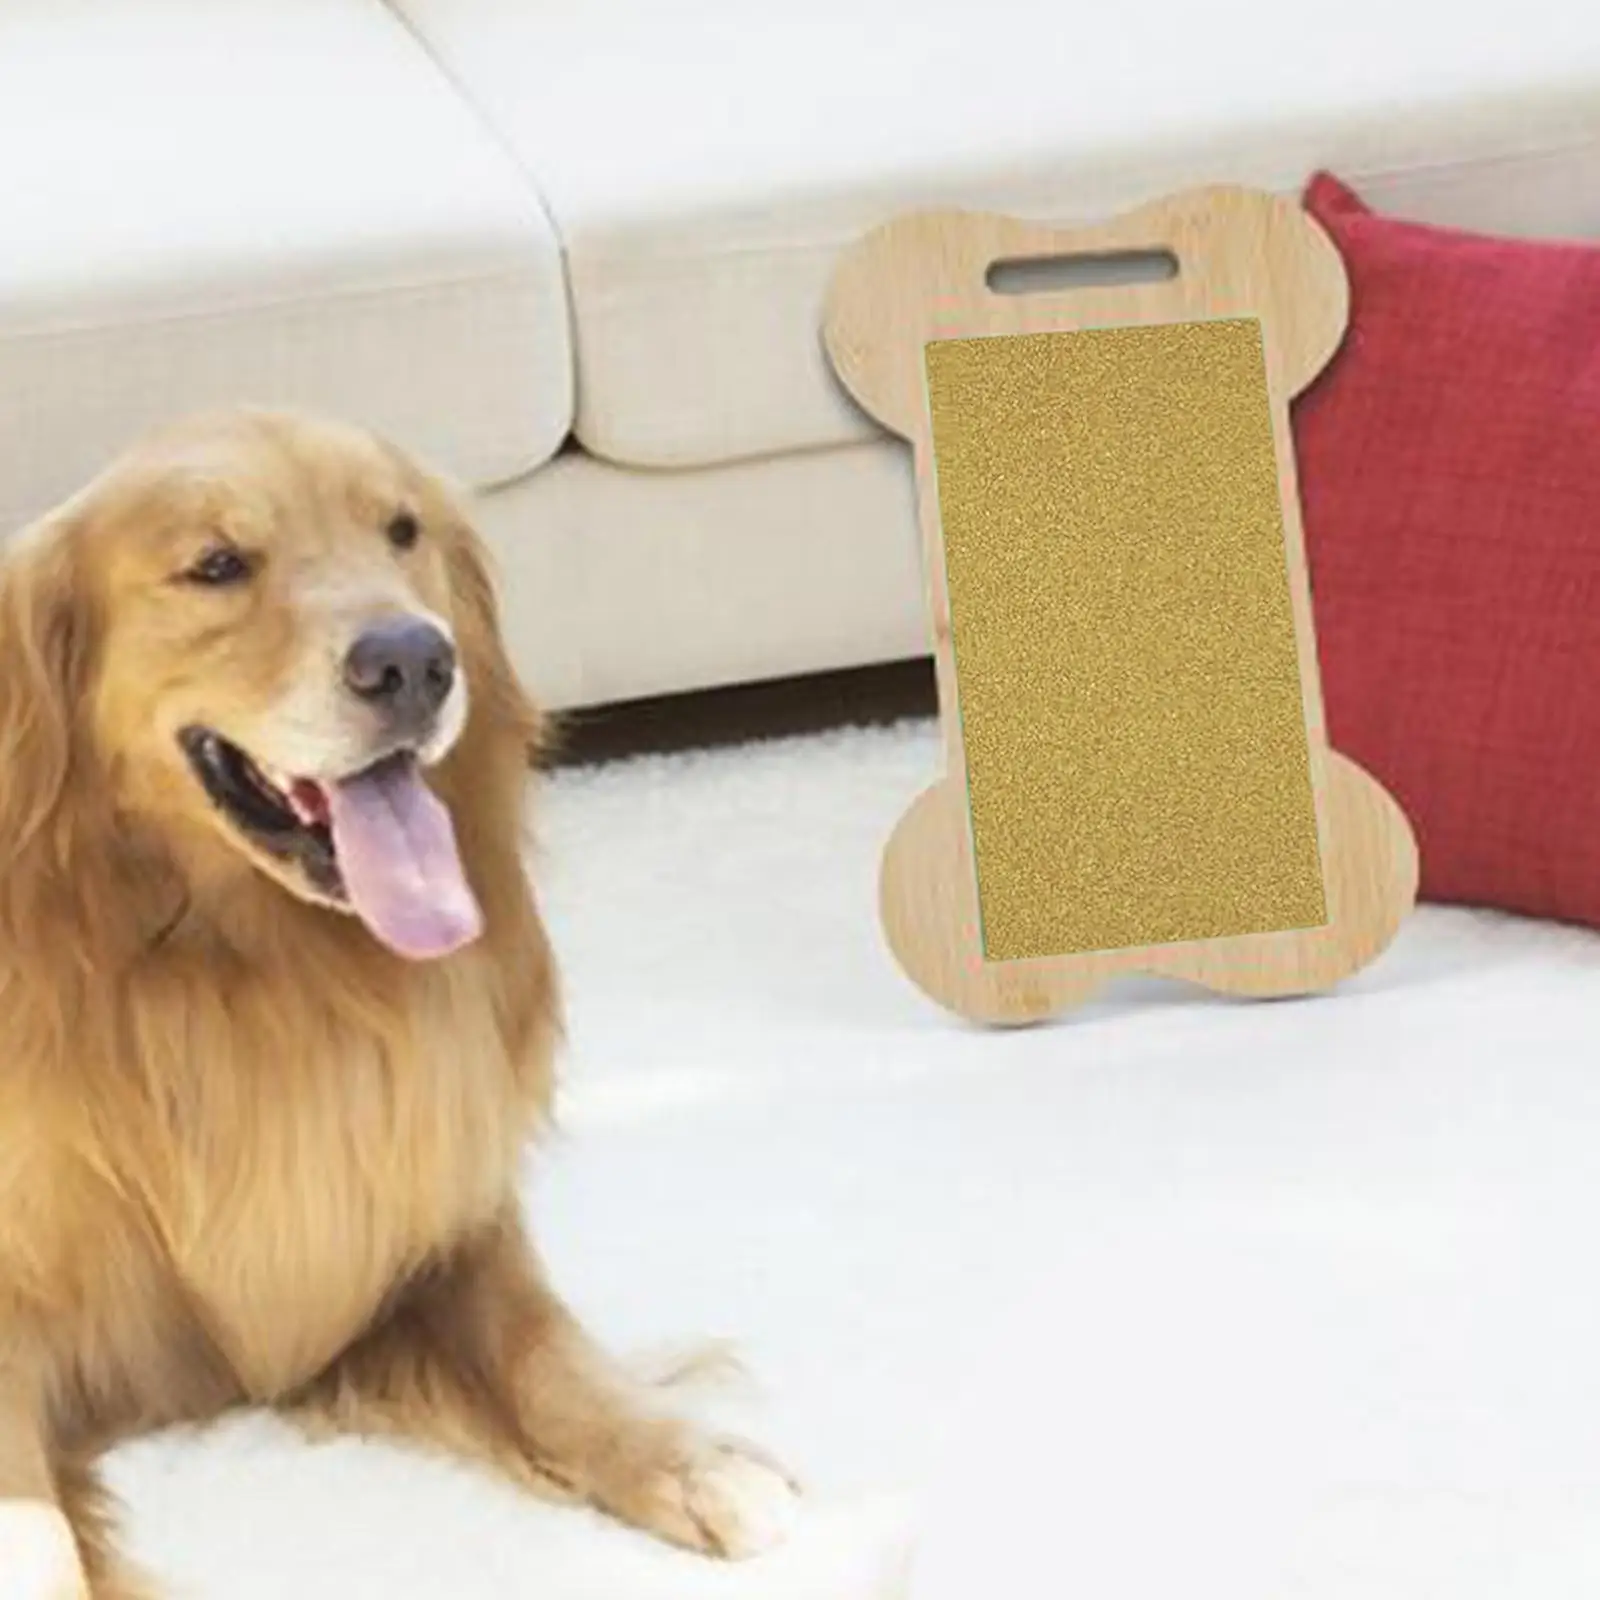 Dog Scratching Pad for Nails Toy Stress Resistant Wooden Dog Scratch Pad for Nails for Dogs Paw Play